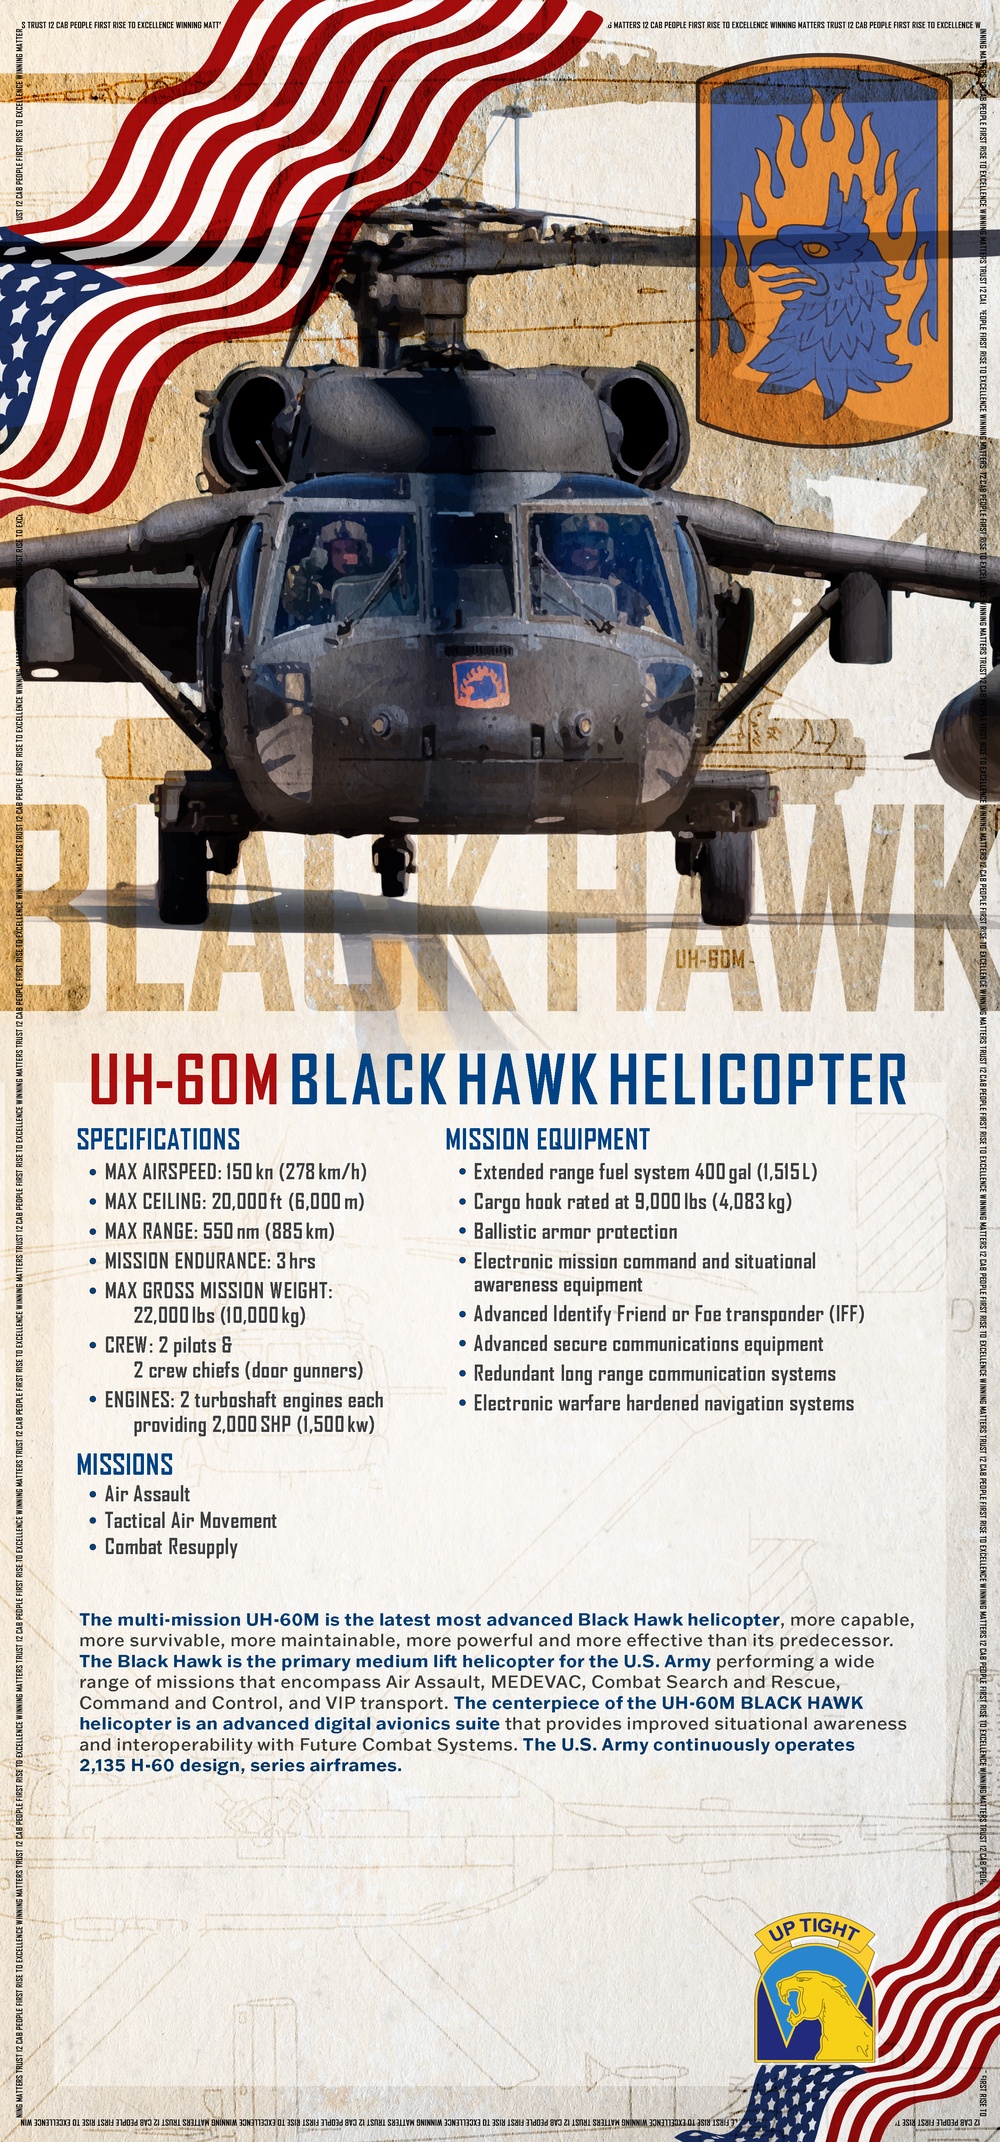 U.S. Army UH-60M Blackhawk Helicopter pop-up display board